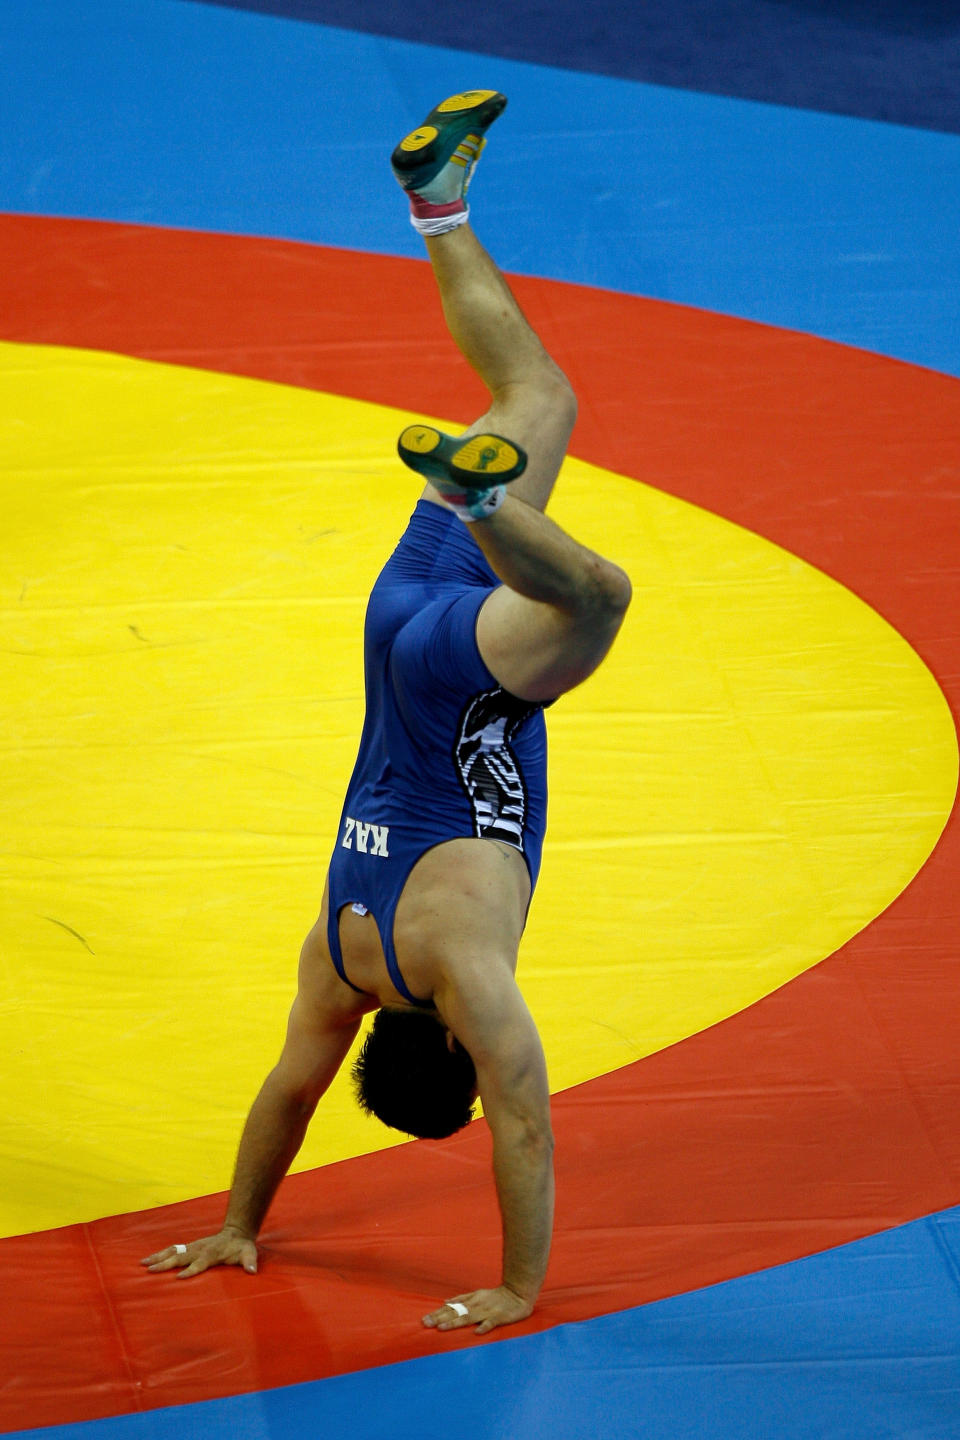 BEIJING - AUGUST 21: Marid Mutalimov of Kazakstan celebrates after winning the bronze medal in the men's 120 kg wrestling gold medal match held at the China Agricultural University Gymnasium during Day 13 of the Beijing 2008 Olympic Games on August 21, 2008 in Beijing, China. (Photo by Harry How/Getty Images)